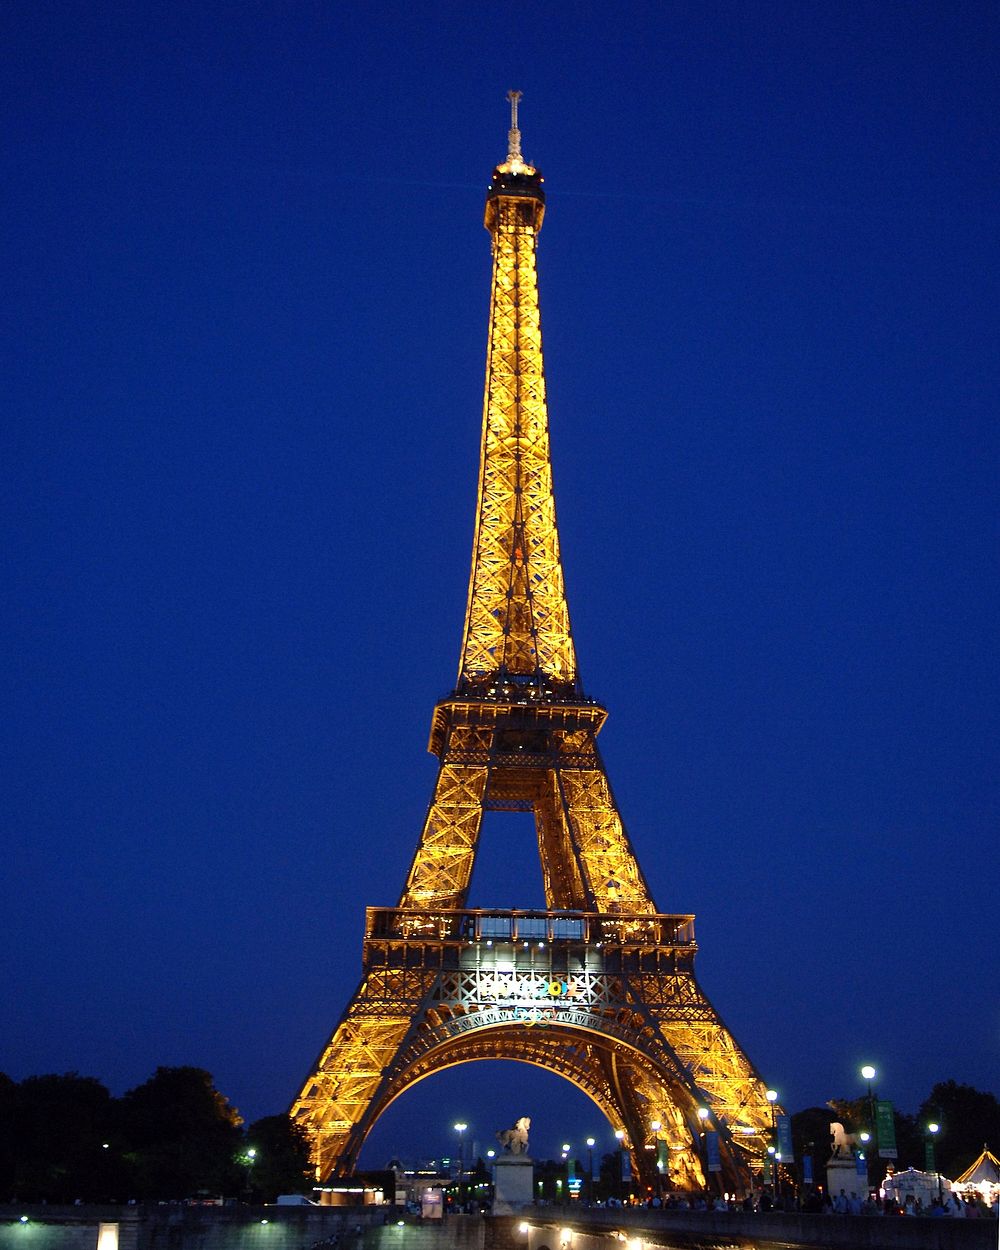 Eiffel Tower with light show. Original public domain image from Wikimedia Commons